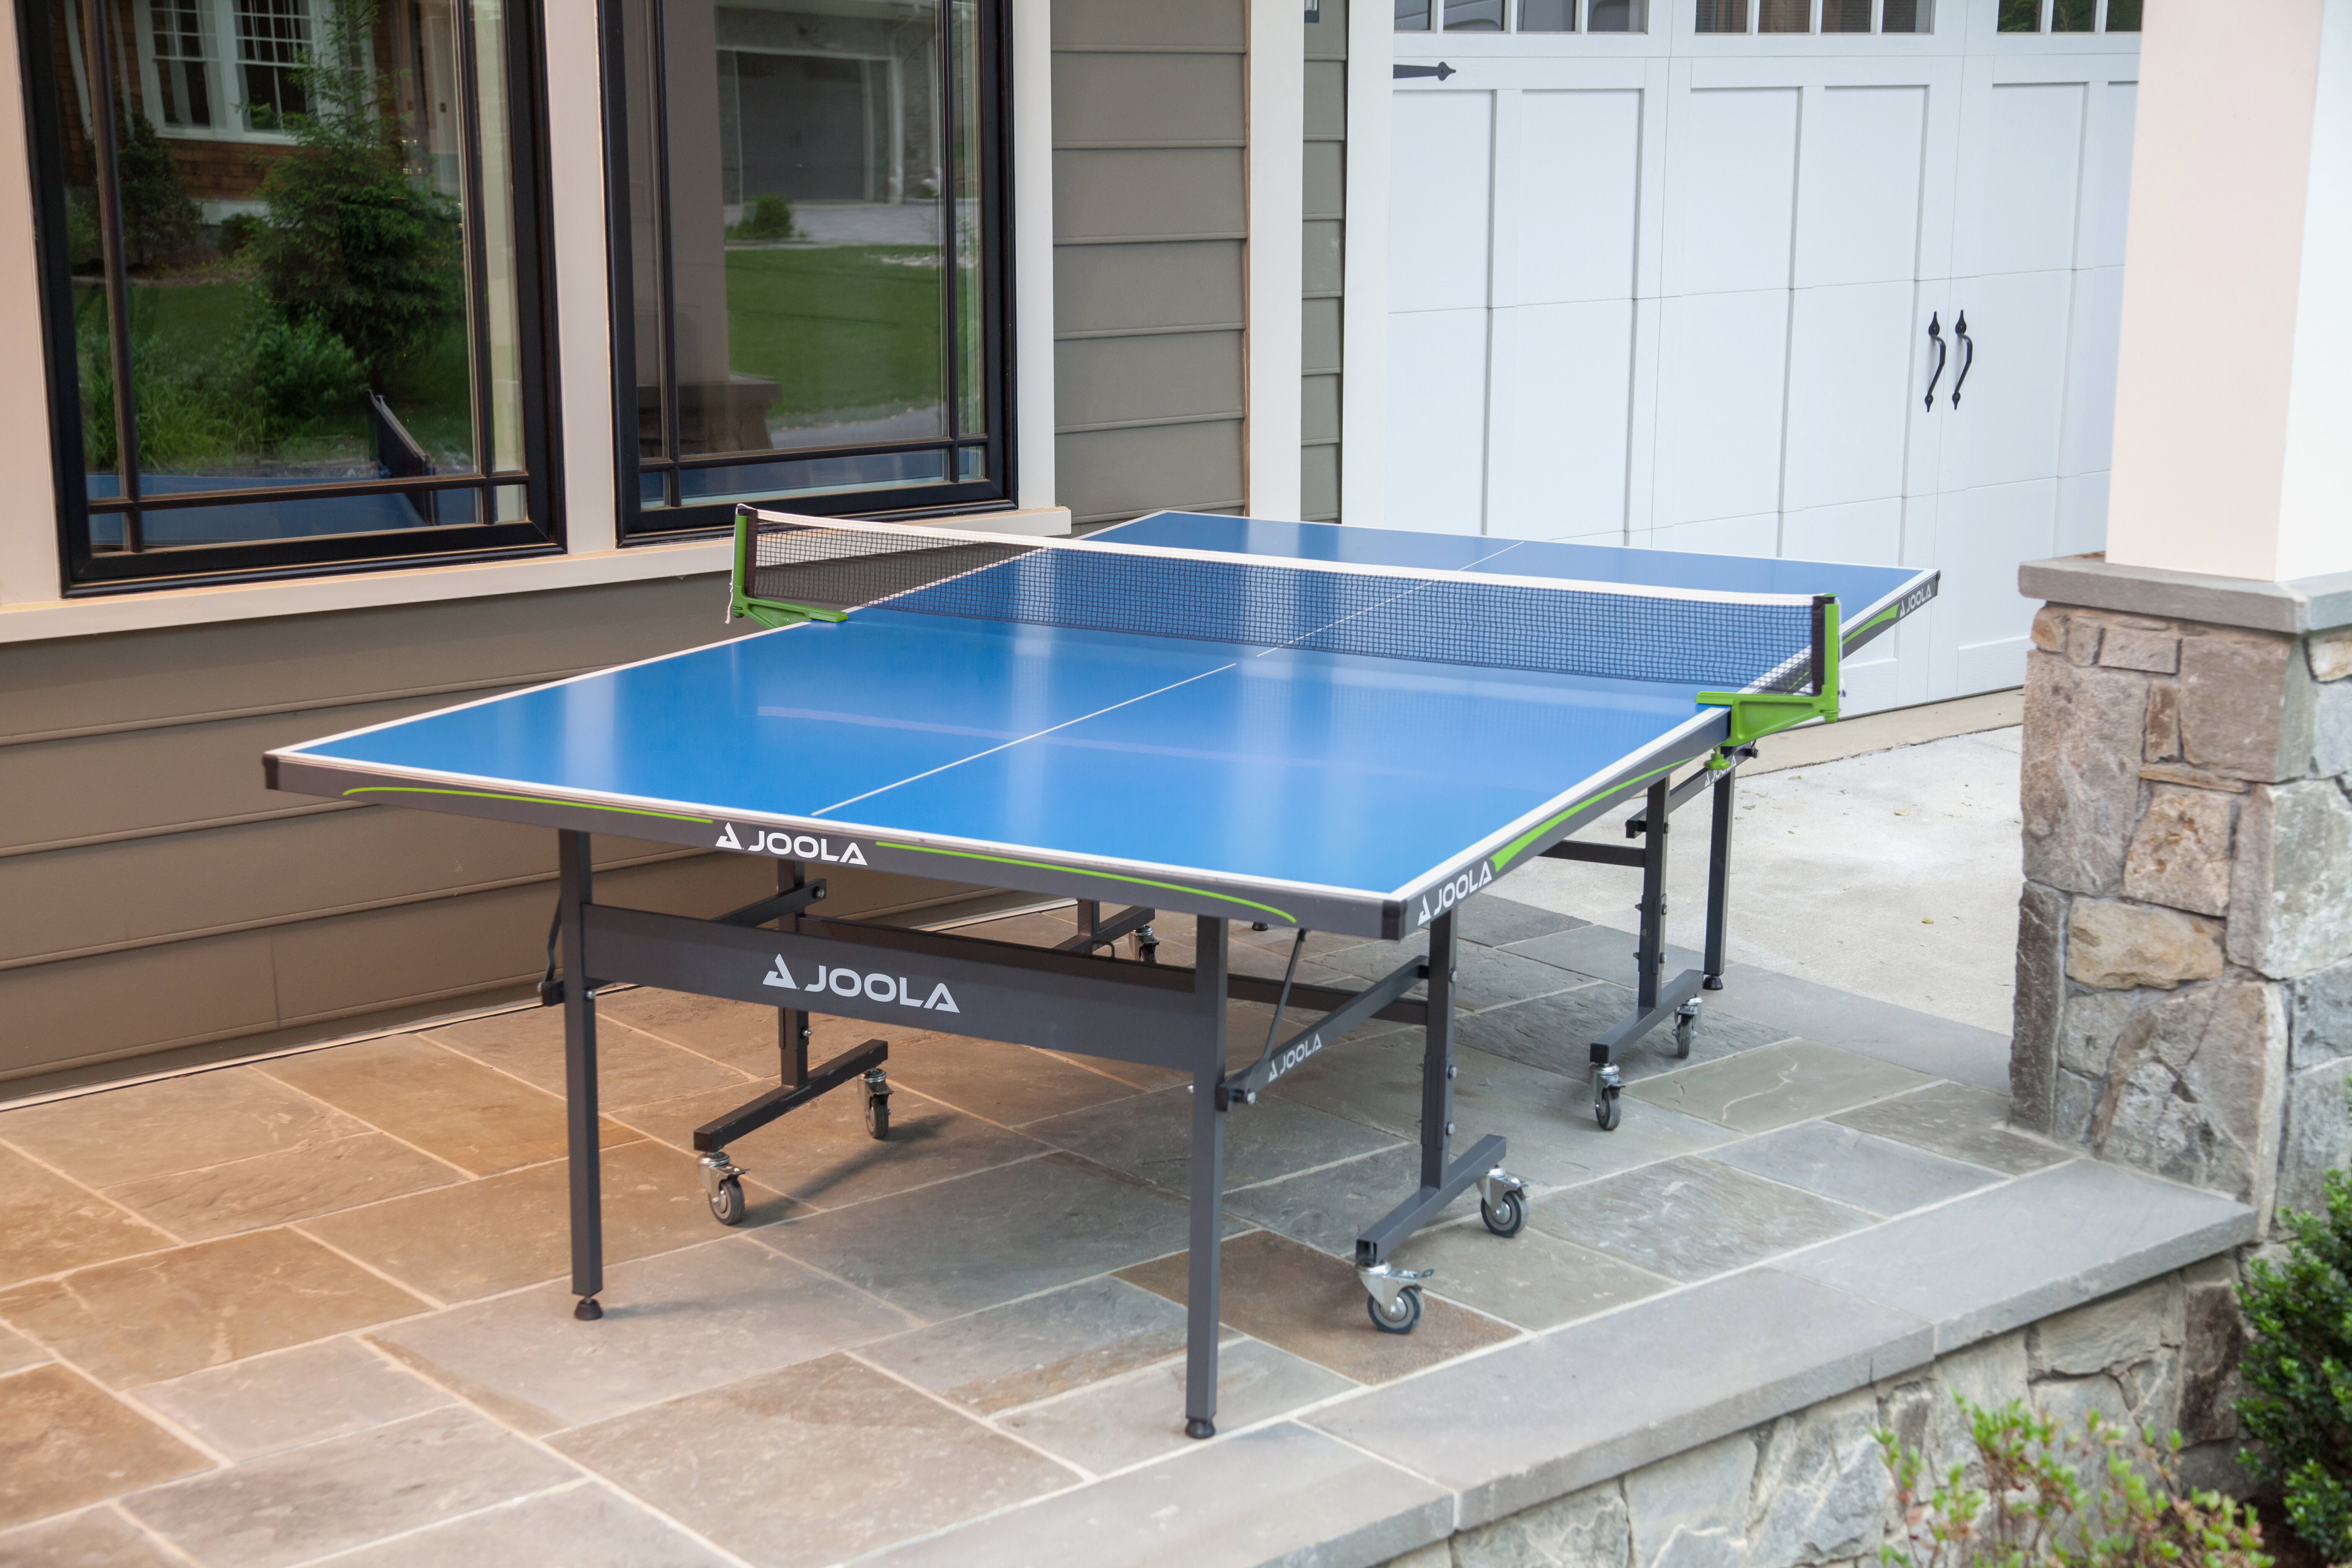 Joola Nova Outdoor Table Tennis Table - Foldable Outside Ping Pong Table for Outdoor and Indoor - Waterproof Aluminum Weatherproof Ping Pong Net and Post Set & Reviews | Wayfair